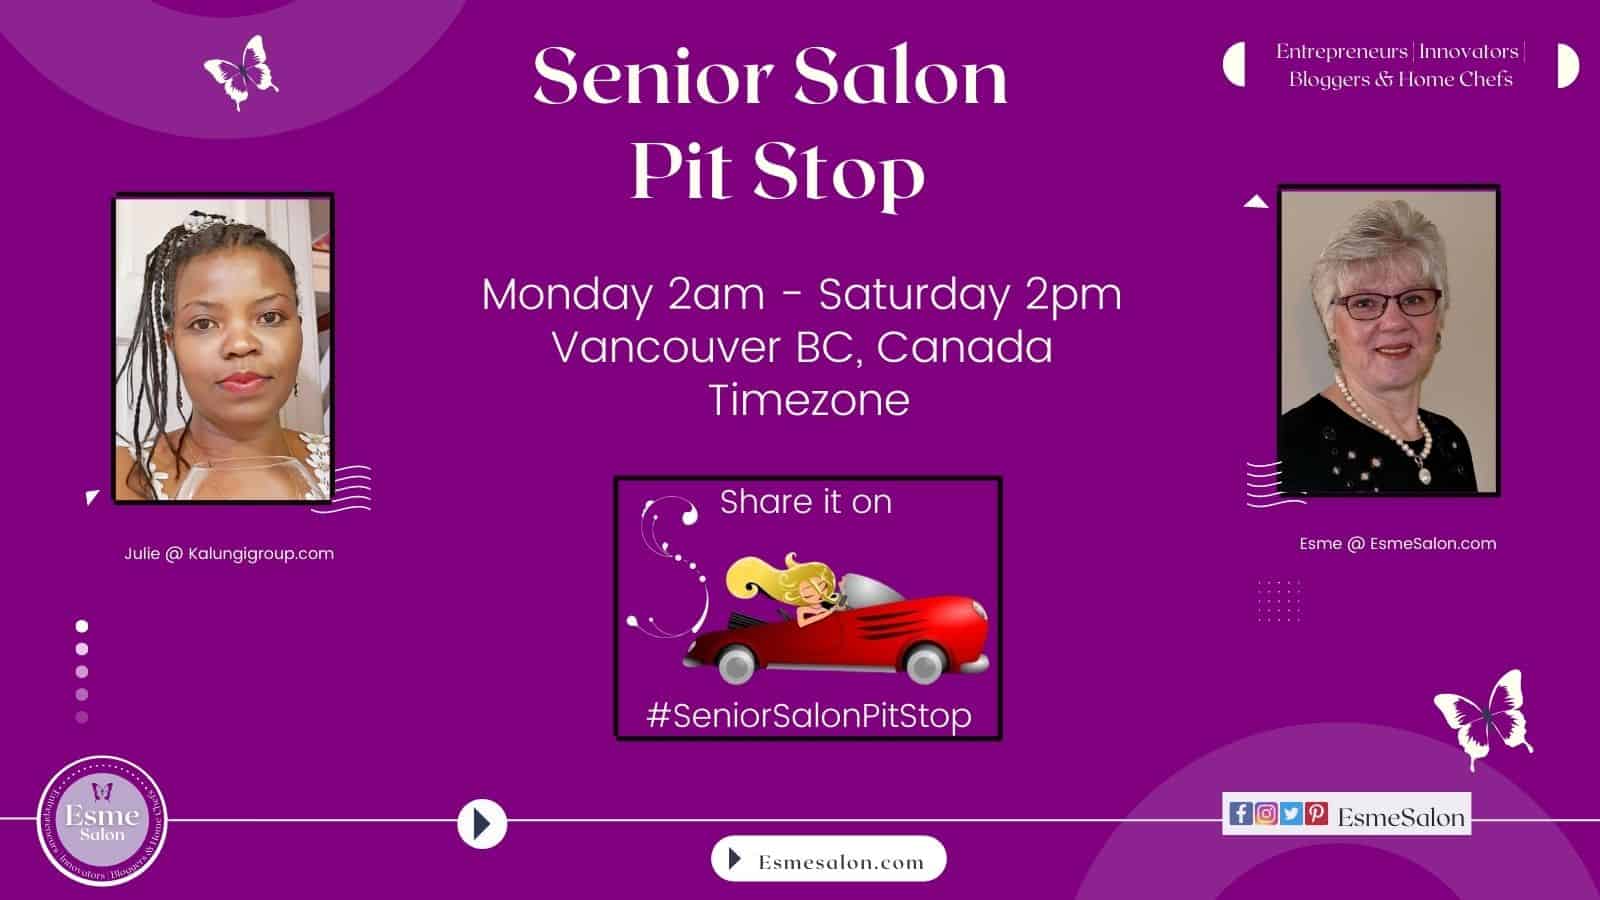 SeniorSalon Pitstop New Logo with Julie and Esme